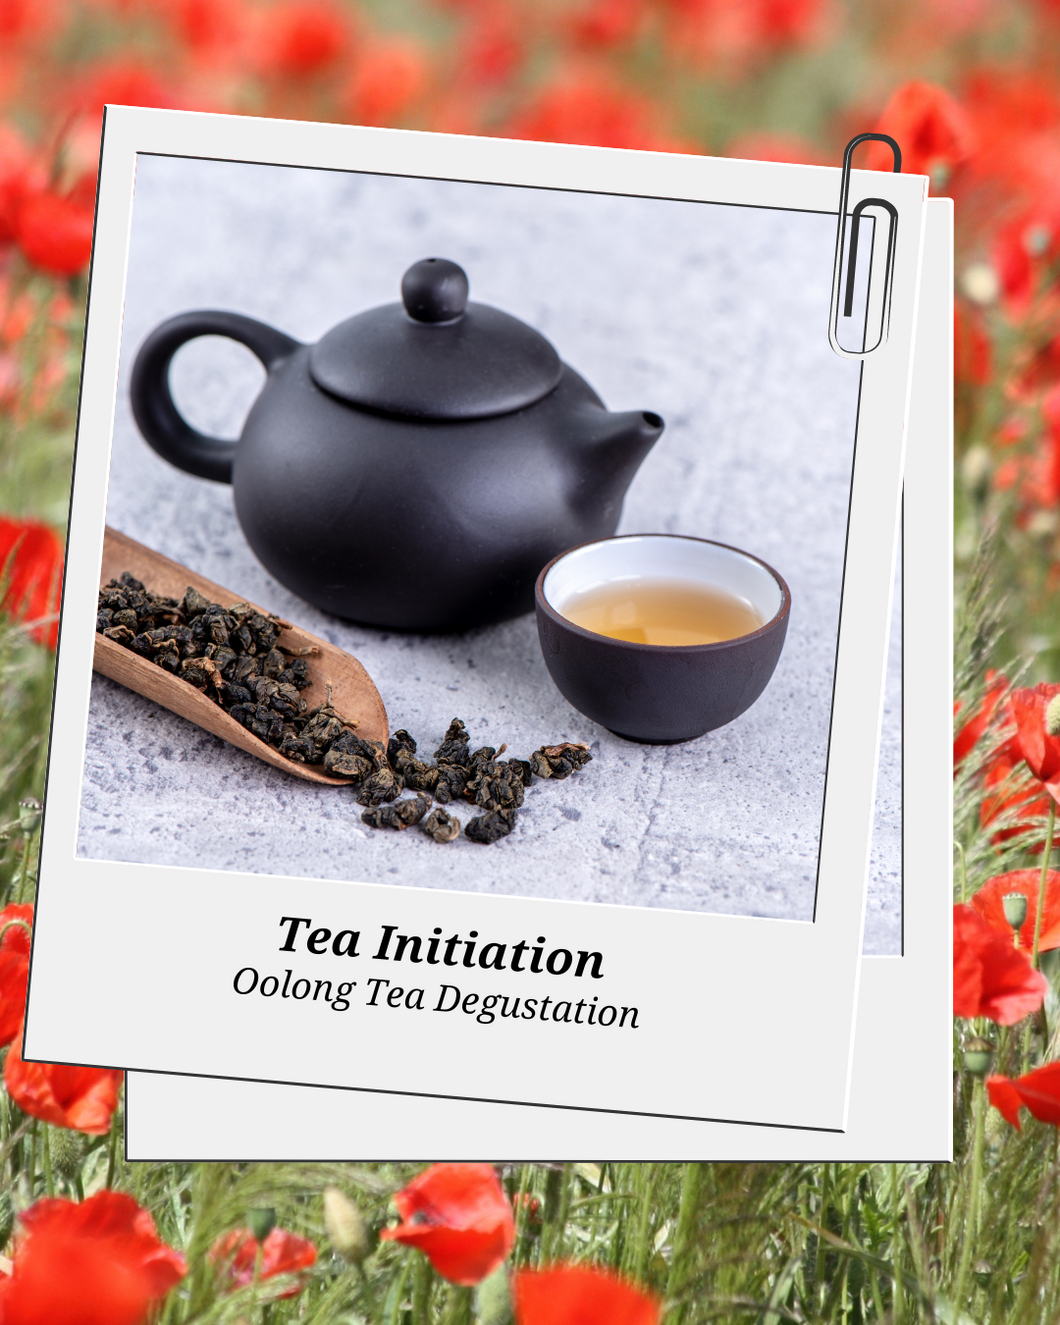 Tea Ceremony Immersion: Oolong Teas Degustation at Bliss Studio - Tuesday, April 30